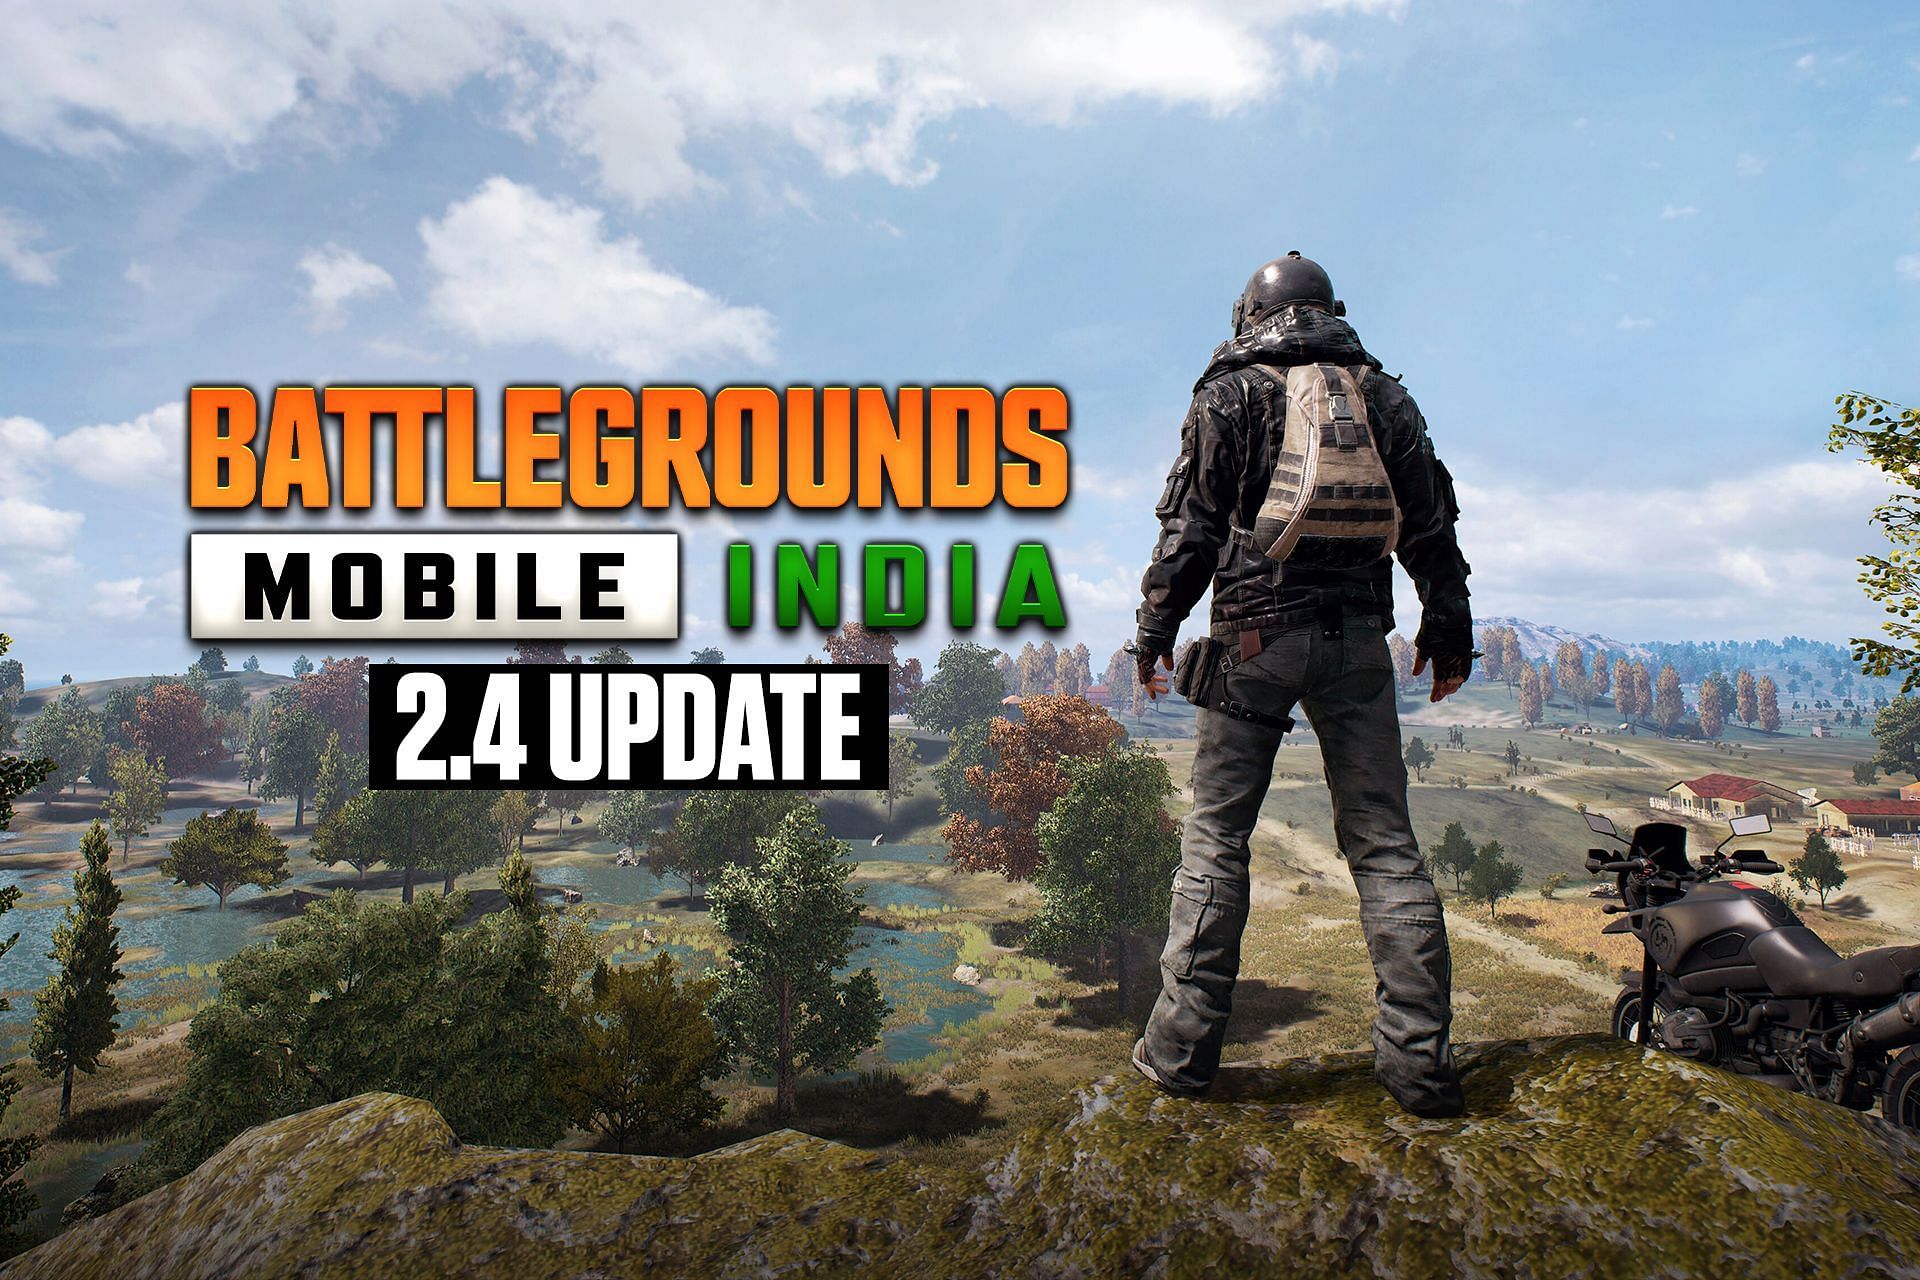 There are no genuine download links for Battlegrounds Mobile India right now (Image via Sportskeeda)